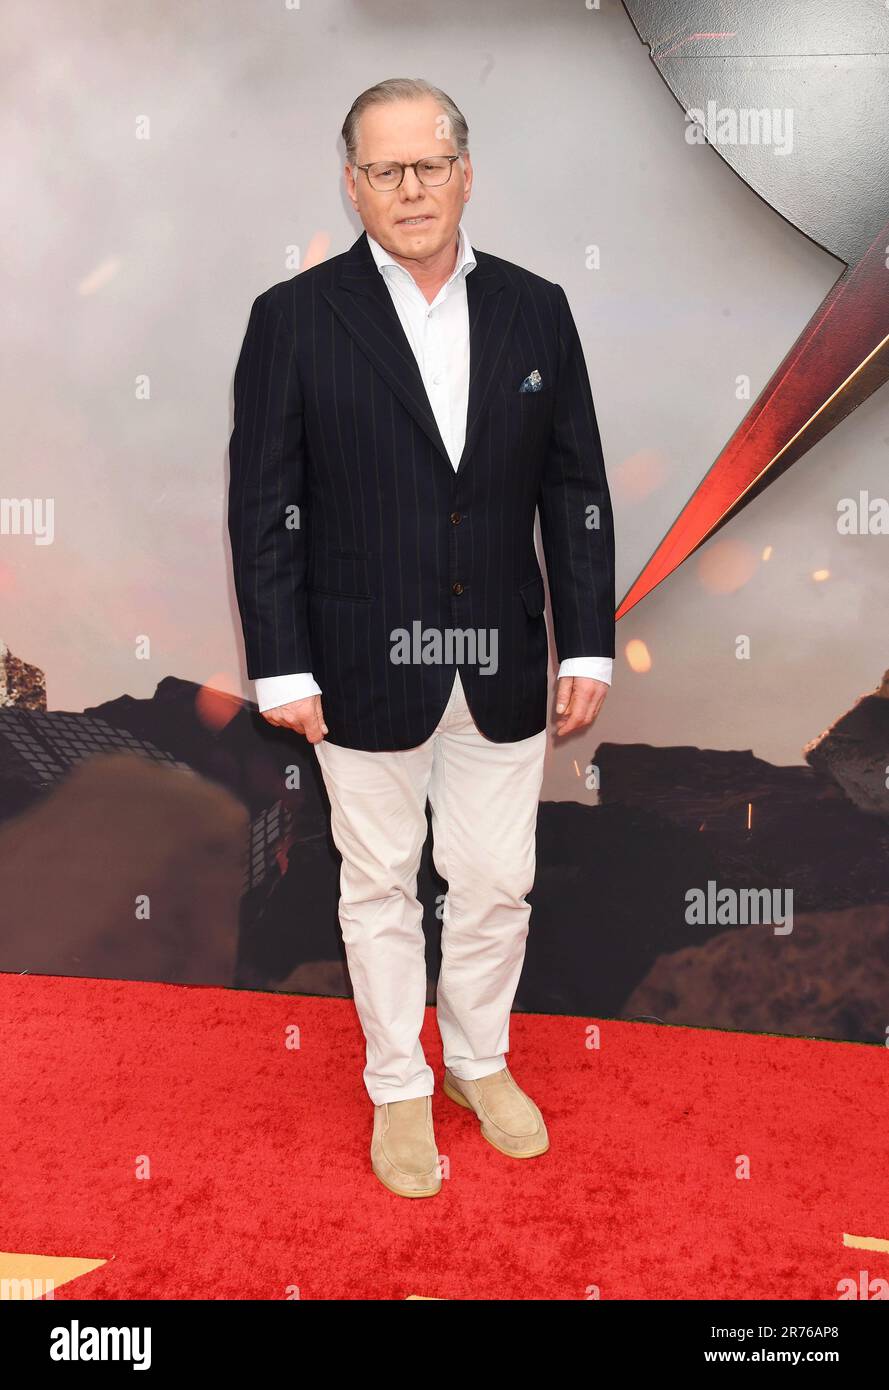 HOLLYWOOD, CALIFORNIA - JUNE 12: CEO Warner Bros. Discovery David Zaslav attends the Los Angeles premiere of Warner Bros. 'The Flash' at Ovation Holly Stock Photo